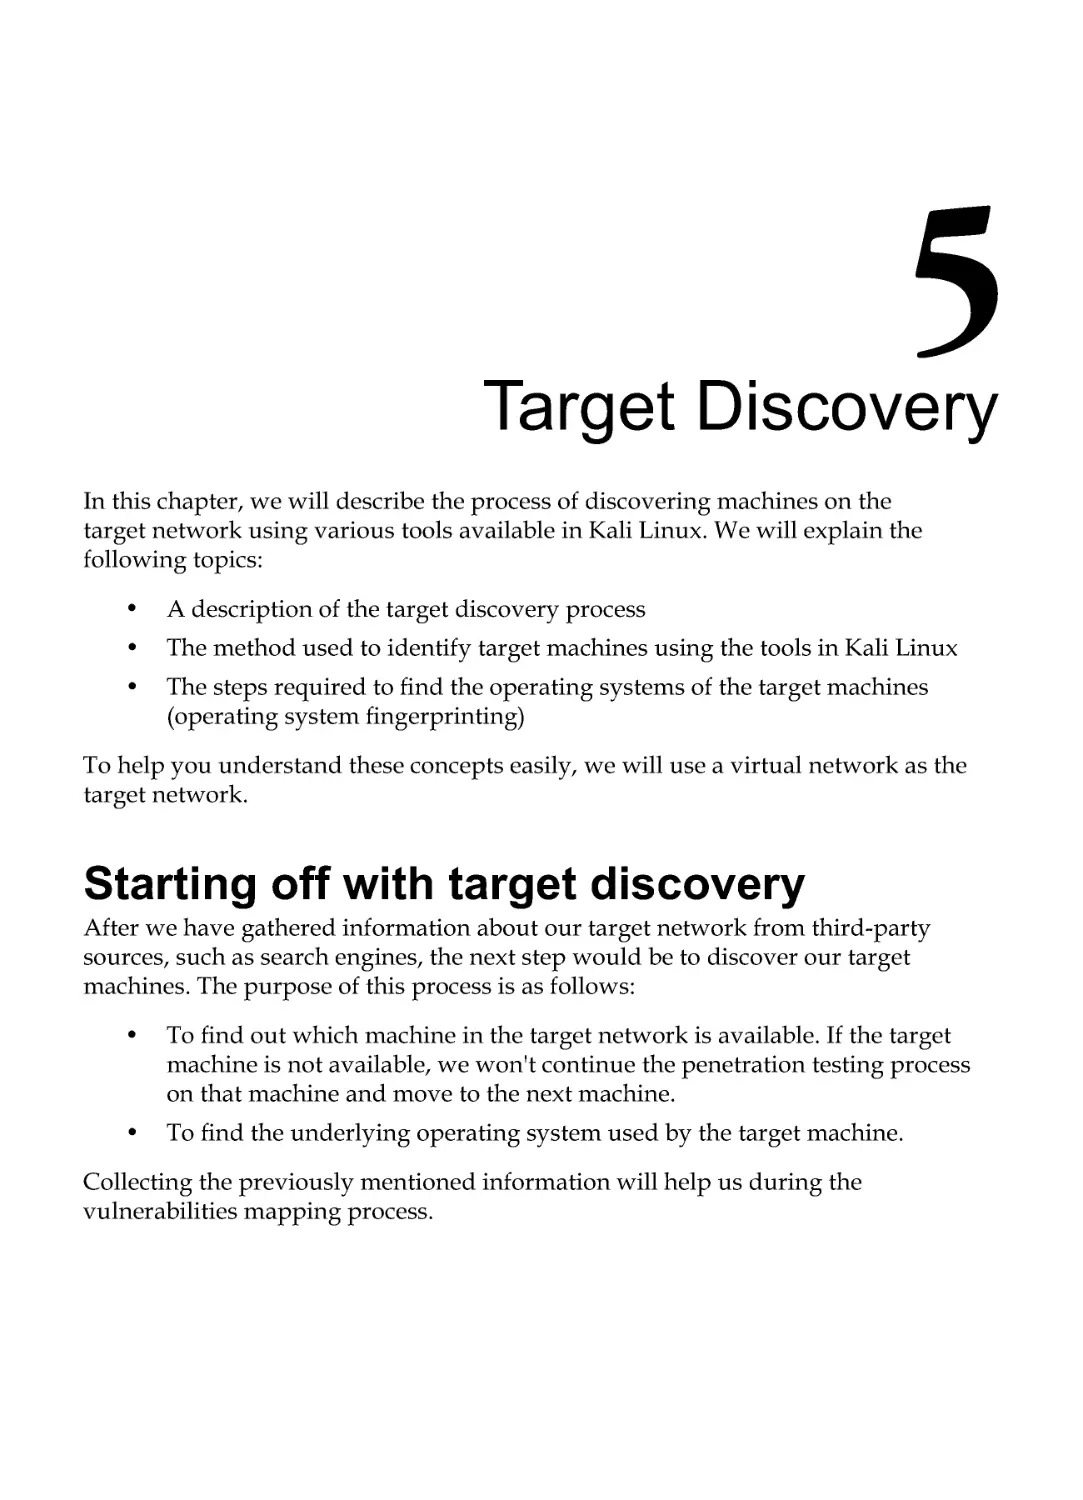 Chapter 5: Target Discovery